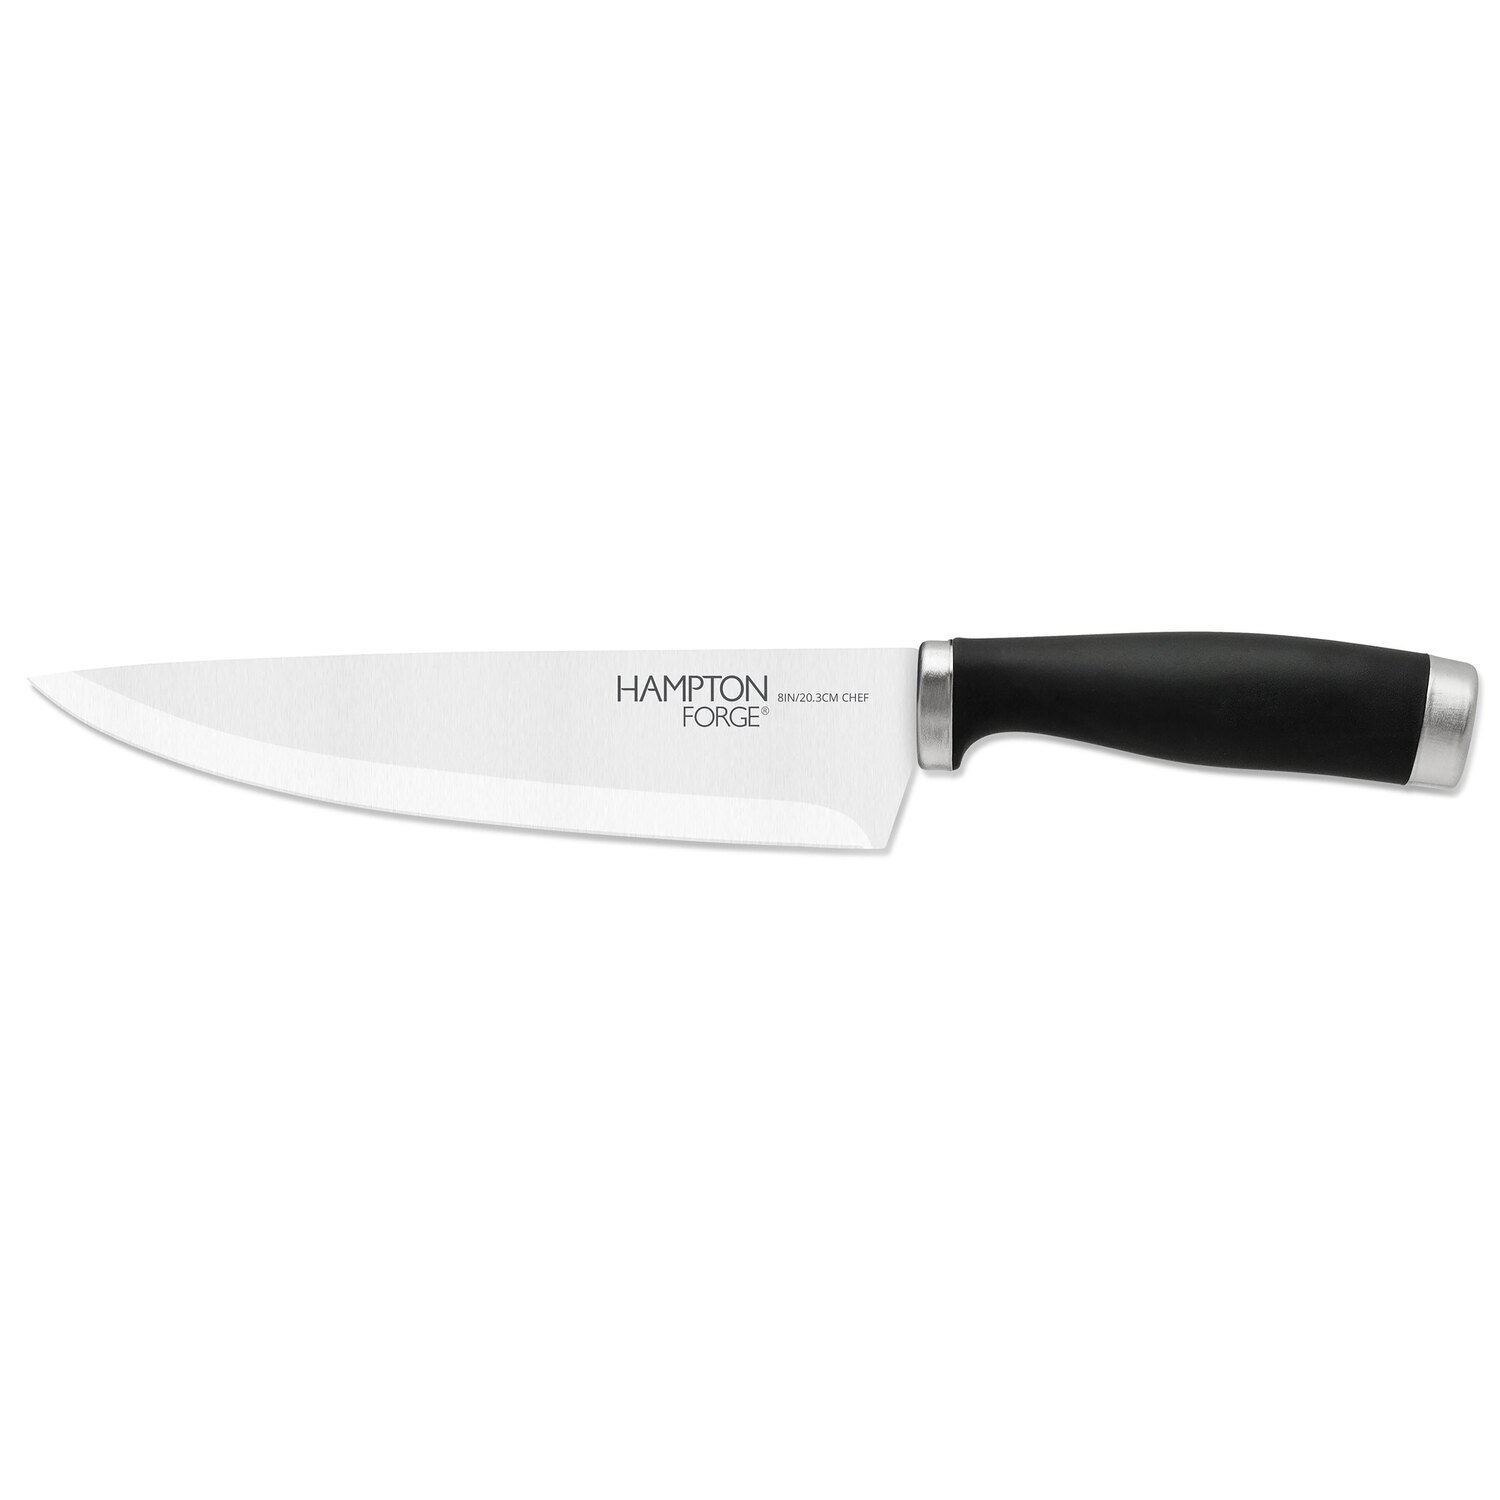 Hampton Forge Epicure 8" Chef Frosted Blade Guard Knife HMC01A10BG